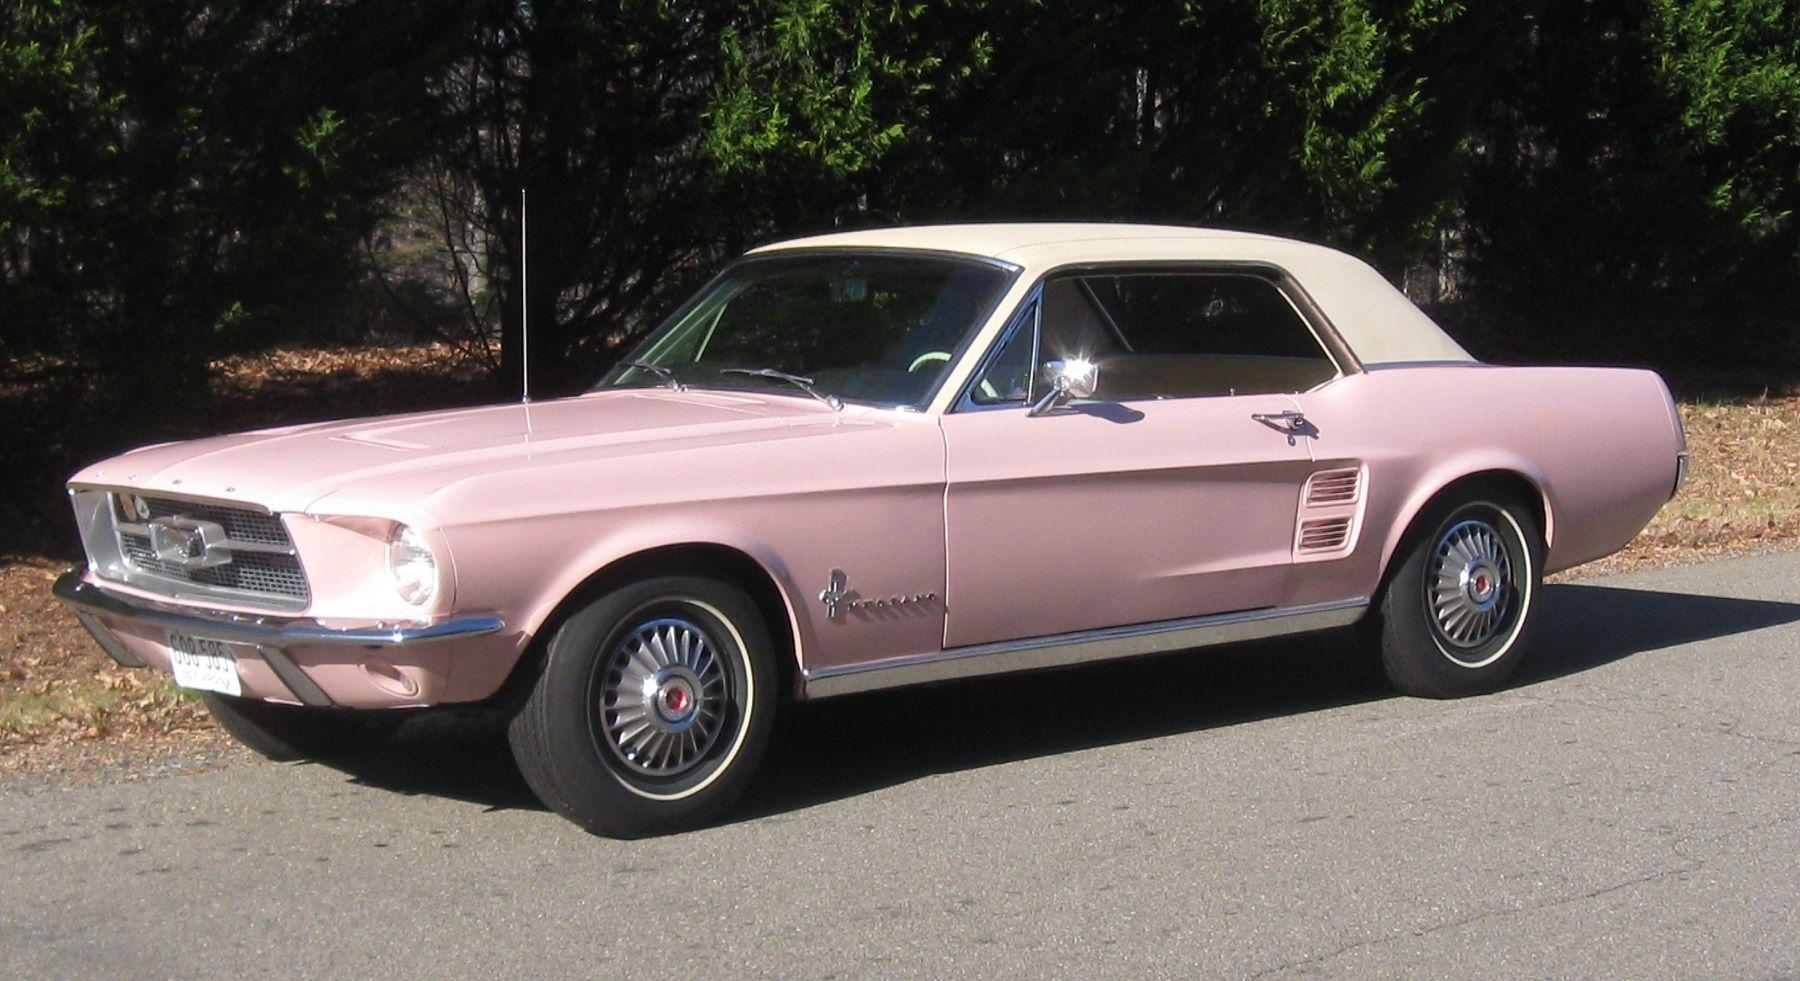 Ford Mustang Paint Logo - 1967 Ford Mustang: Dusk Rose is rare factory color - SFGate